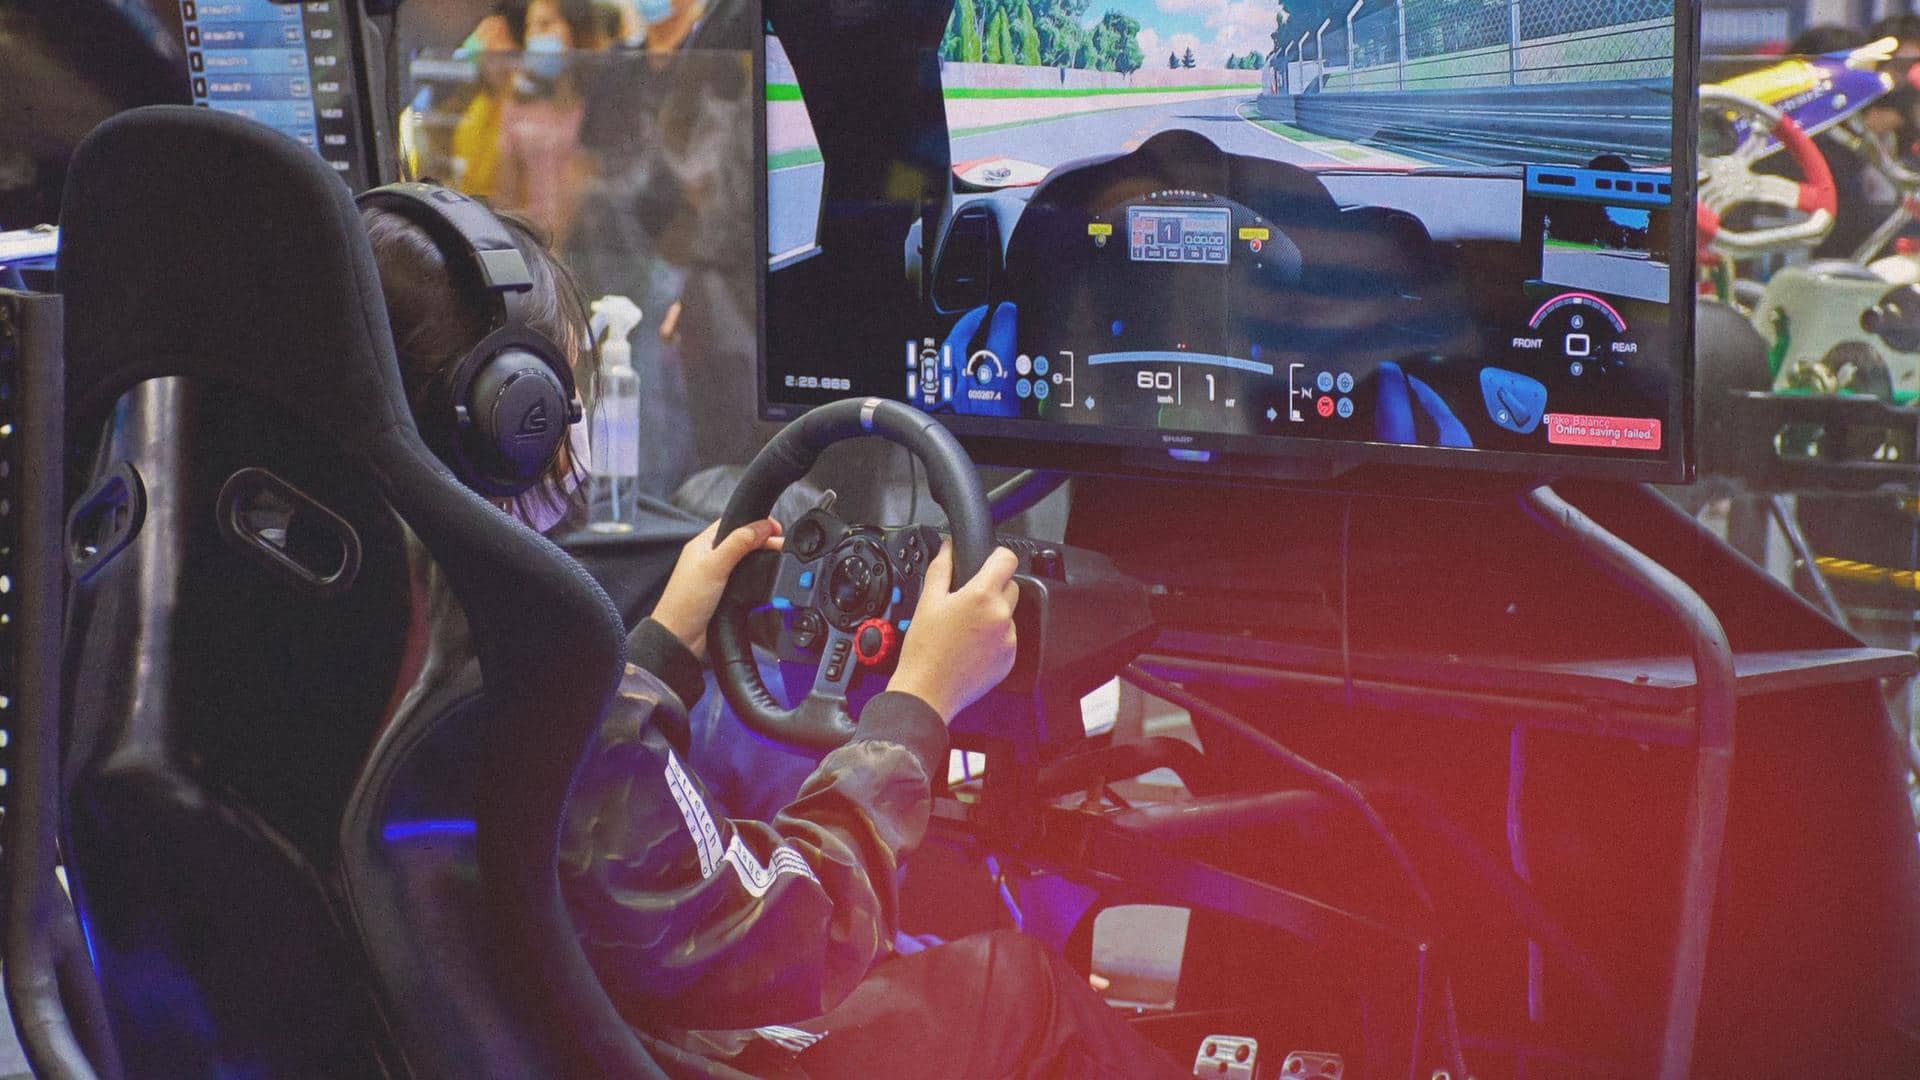 How to Drive a Car by Playing Simulator Games